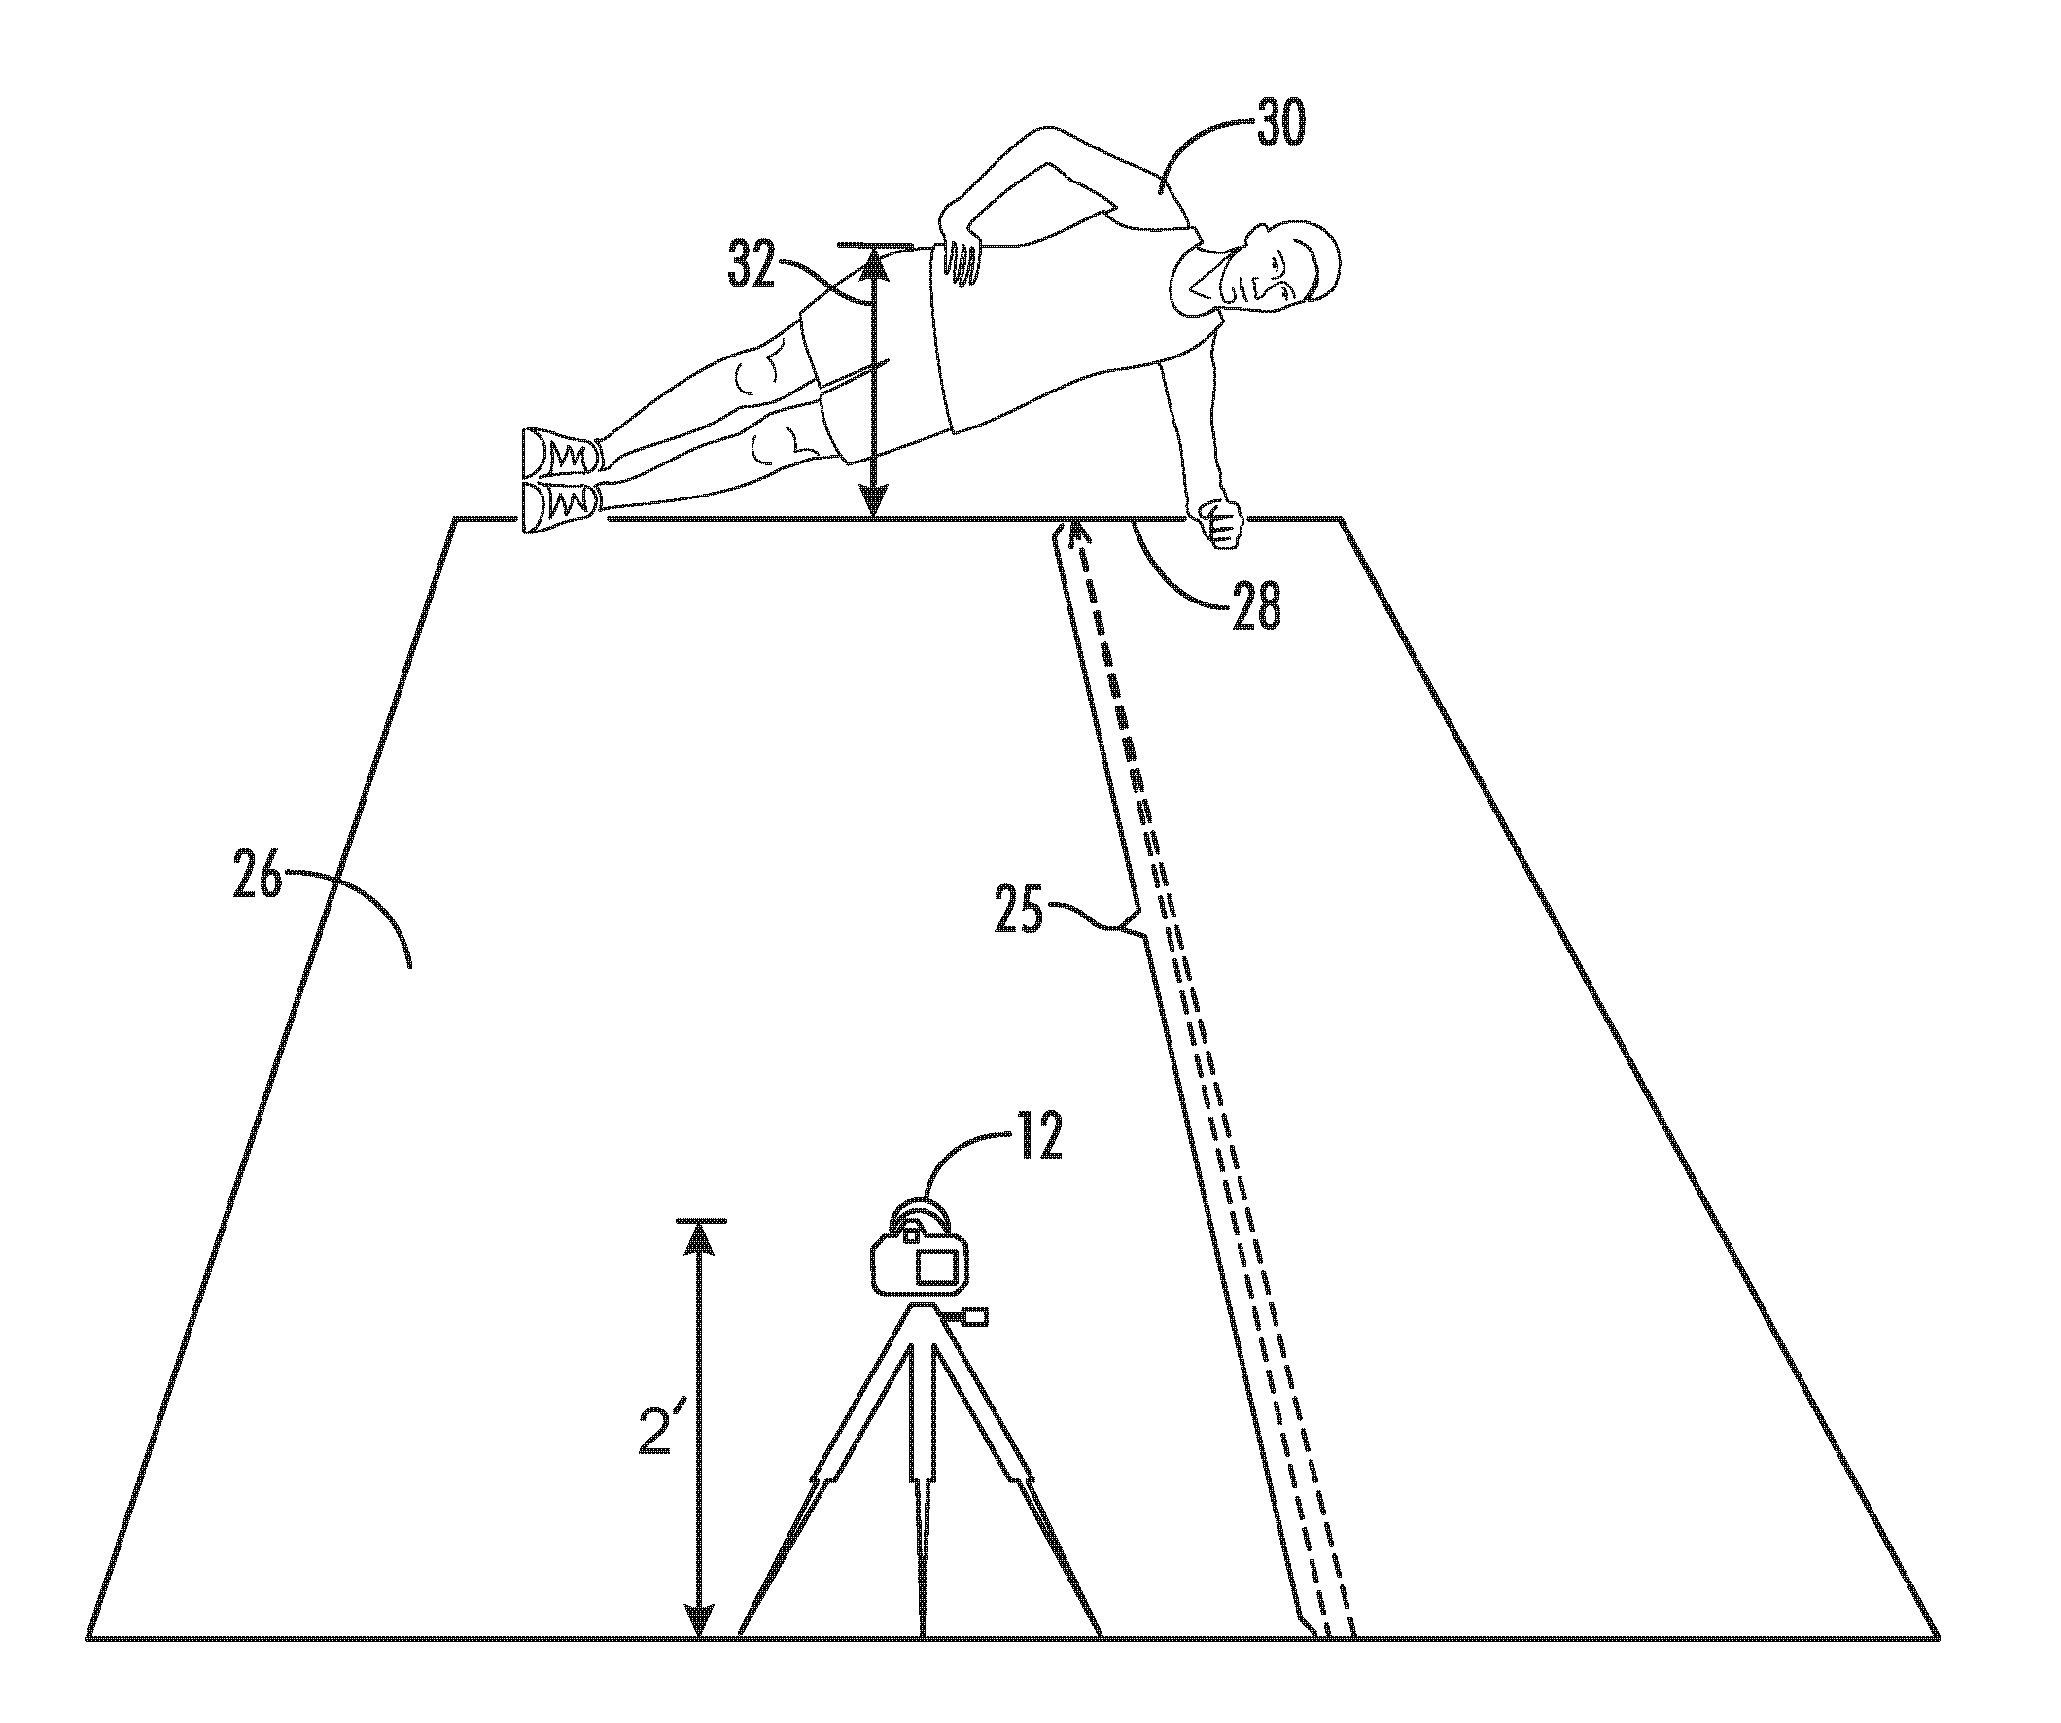 Dynamic movement assessment system and method